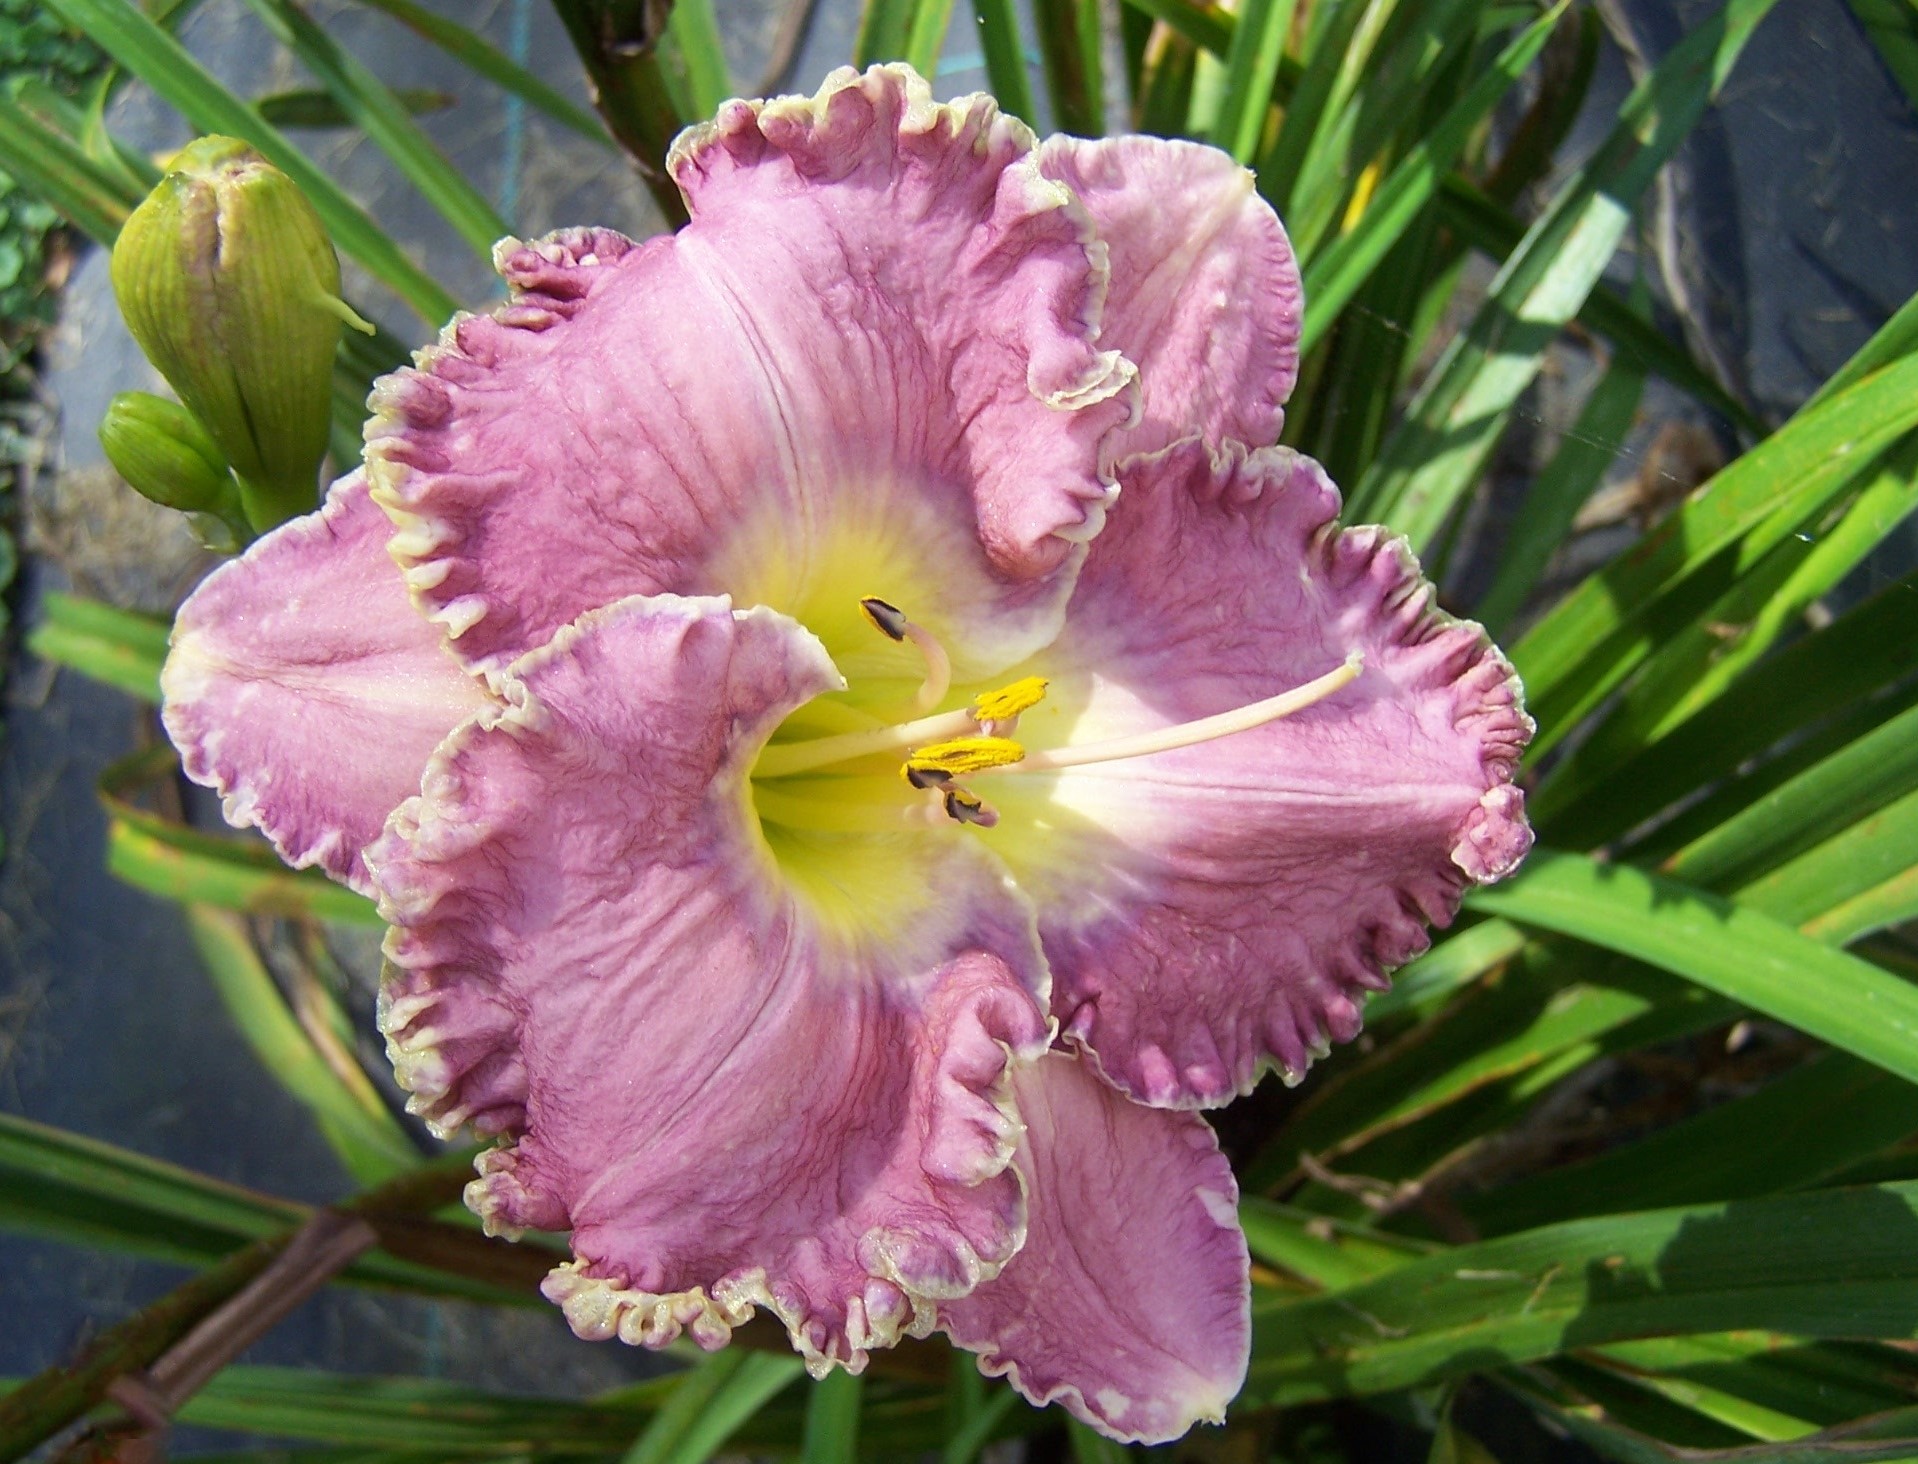 Fountain of Life daylily seedling